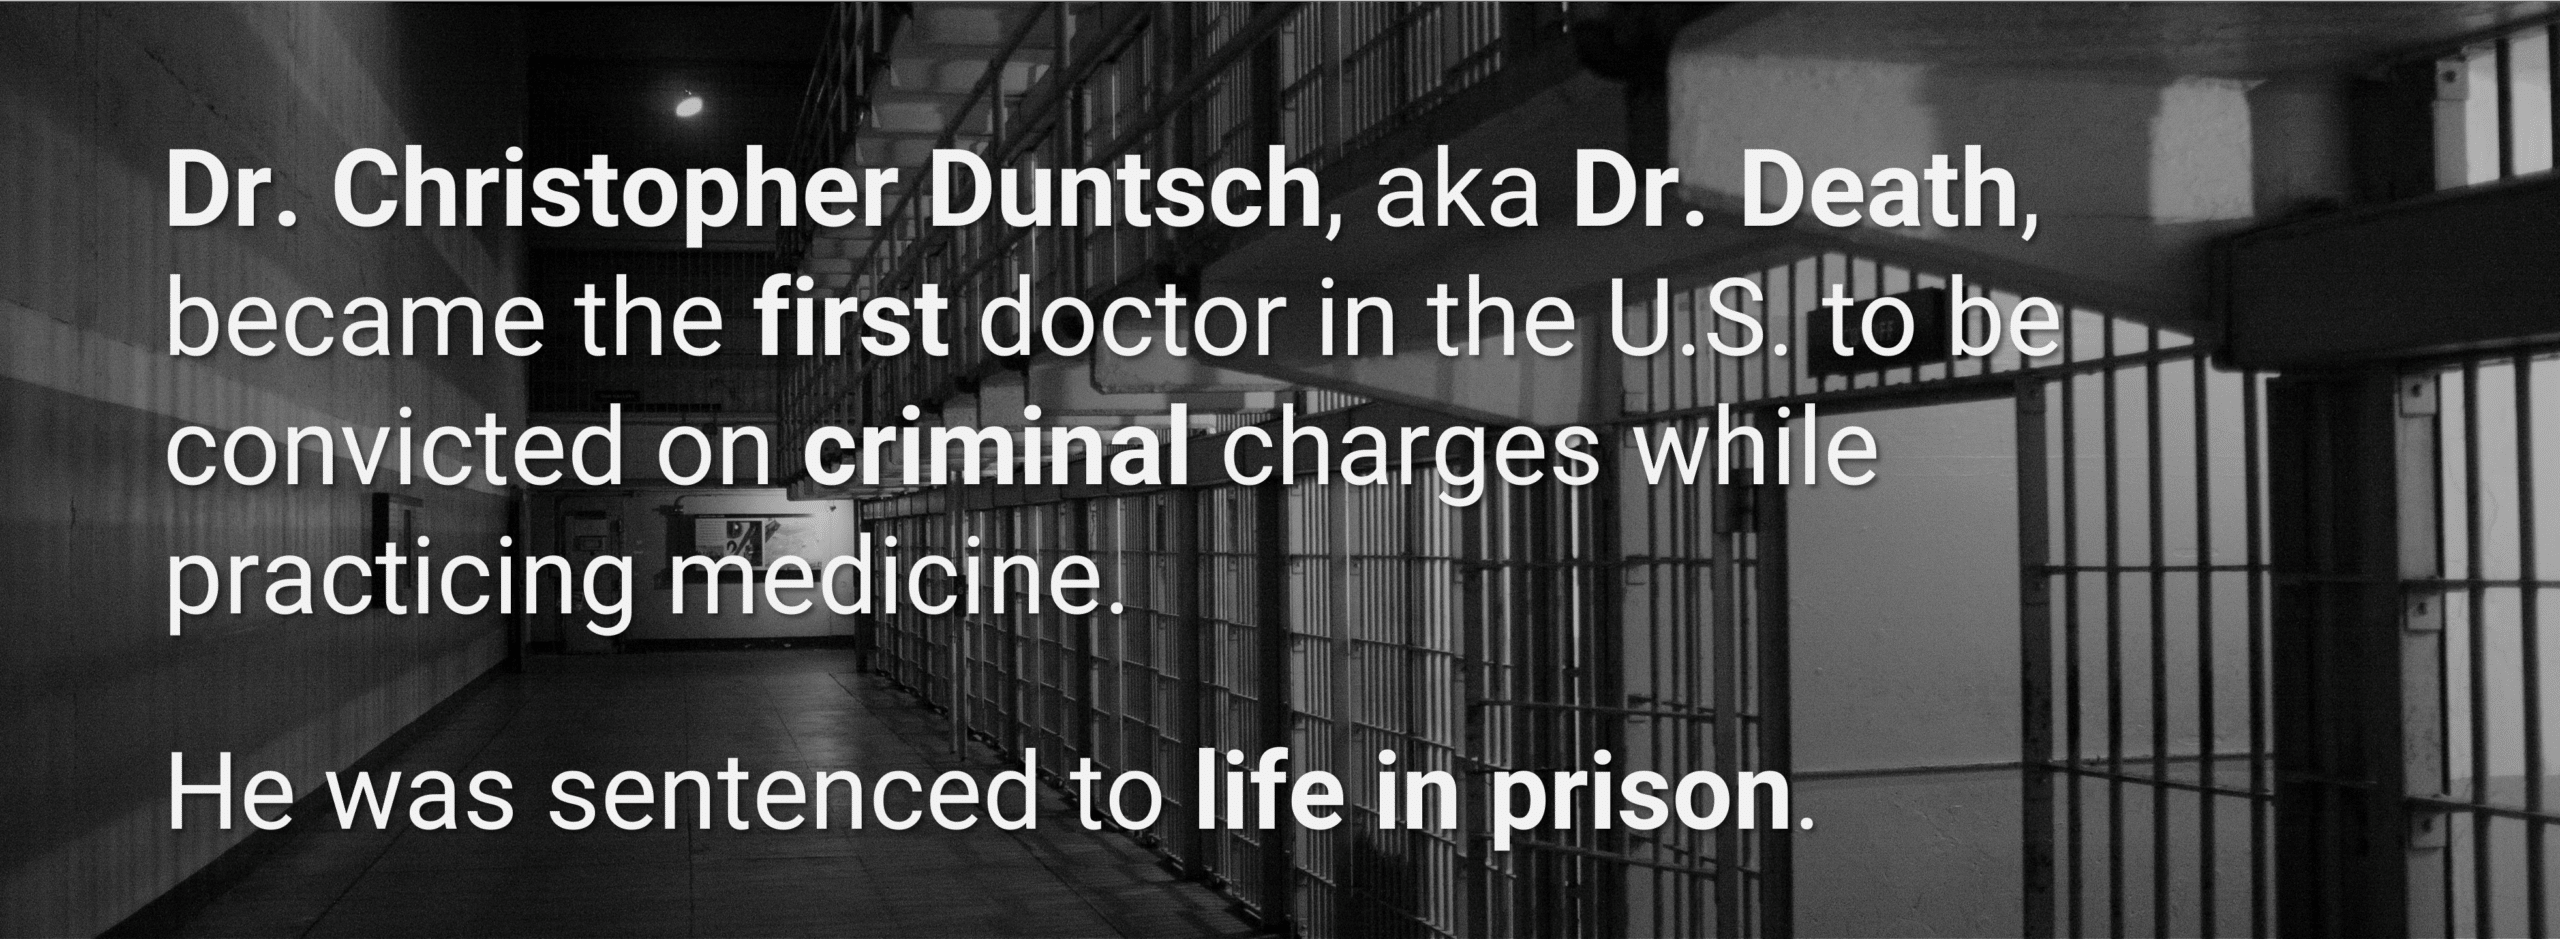 Dr. Death Sentenced To Life In Prison